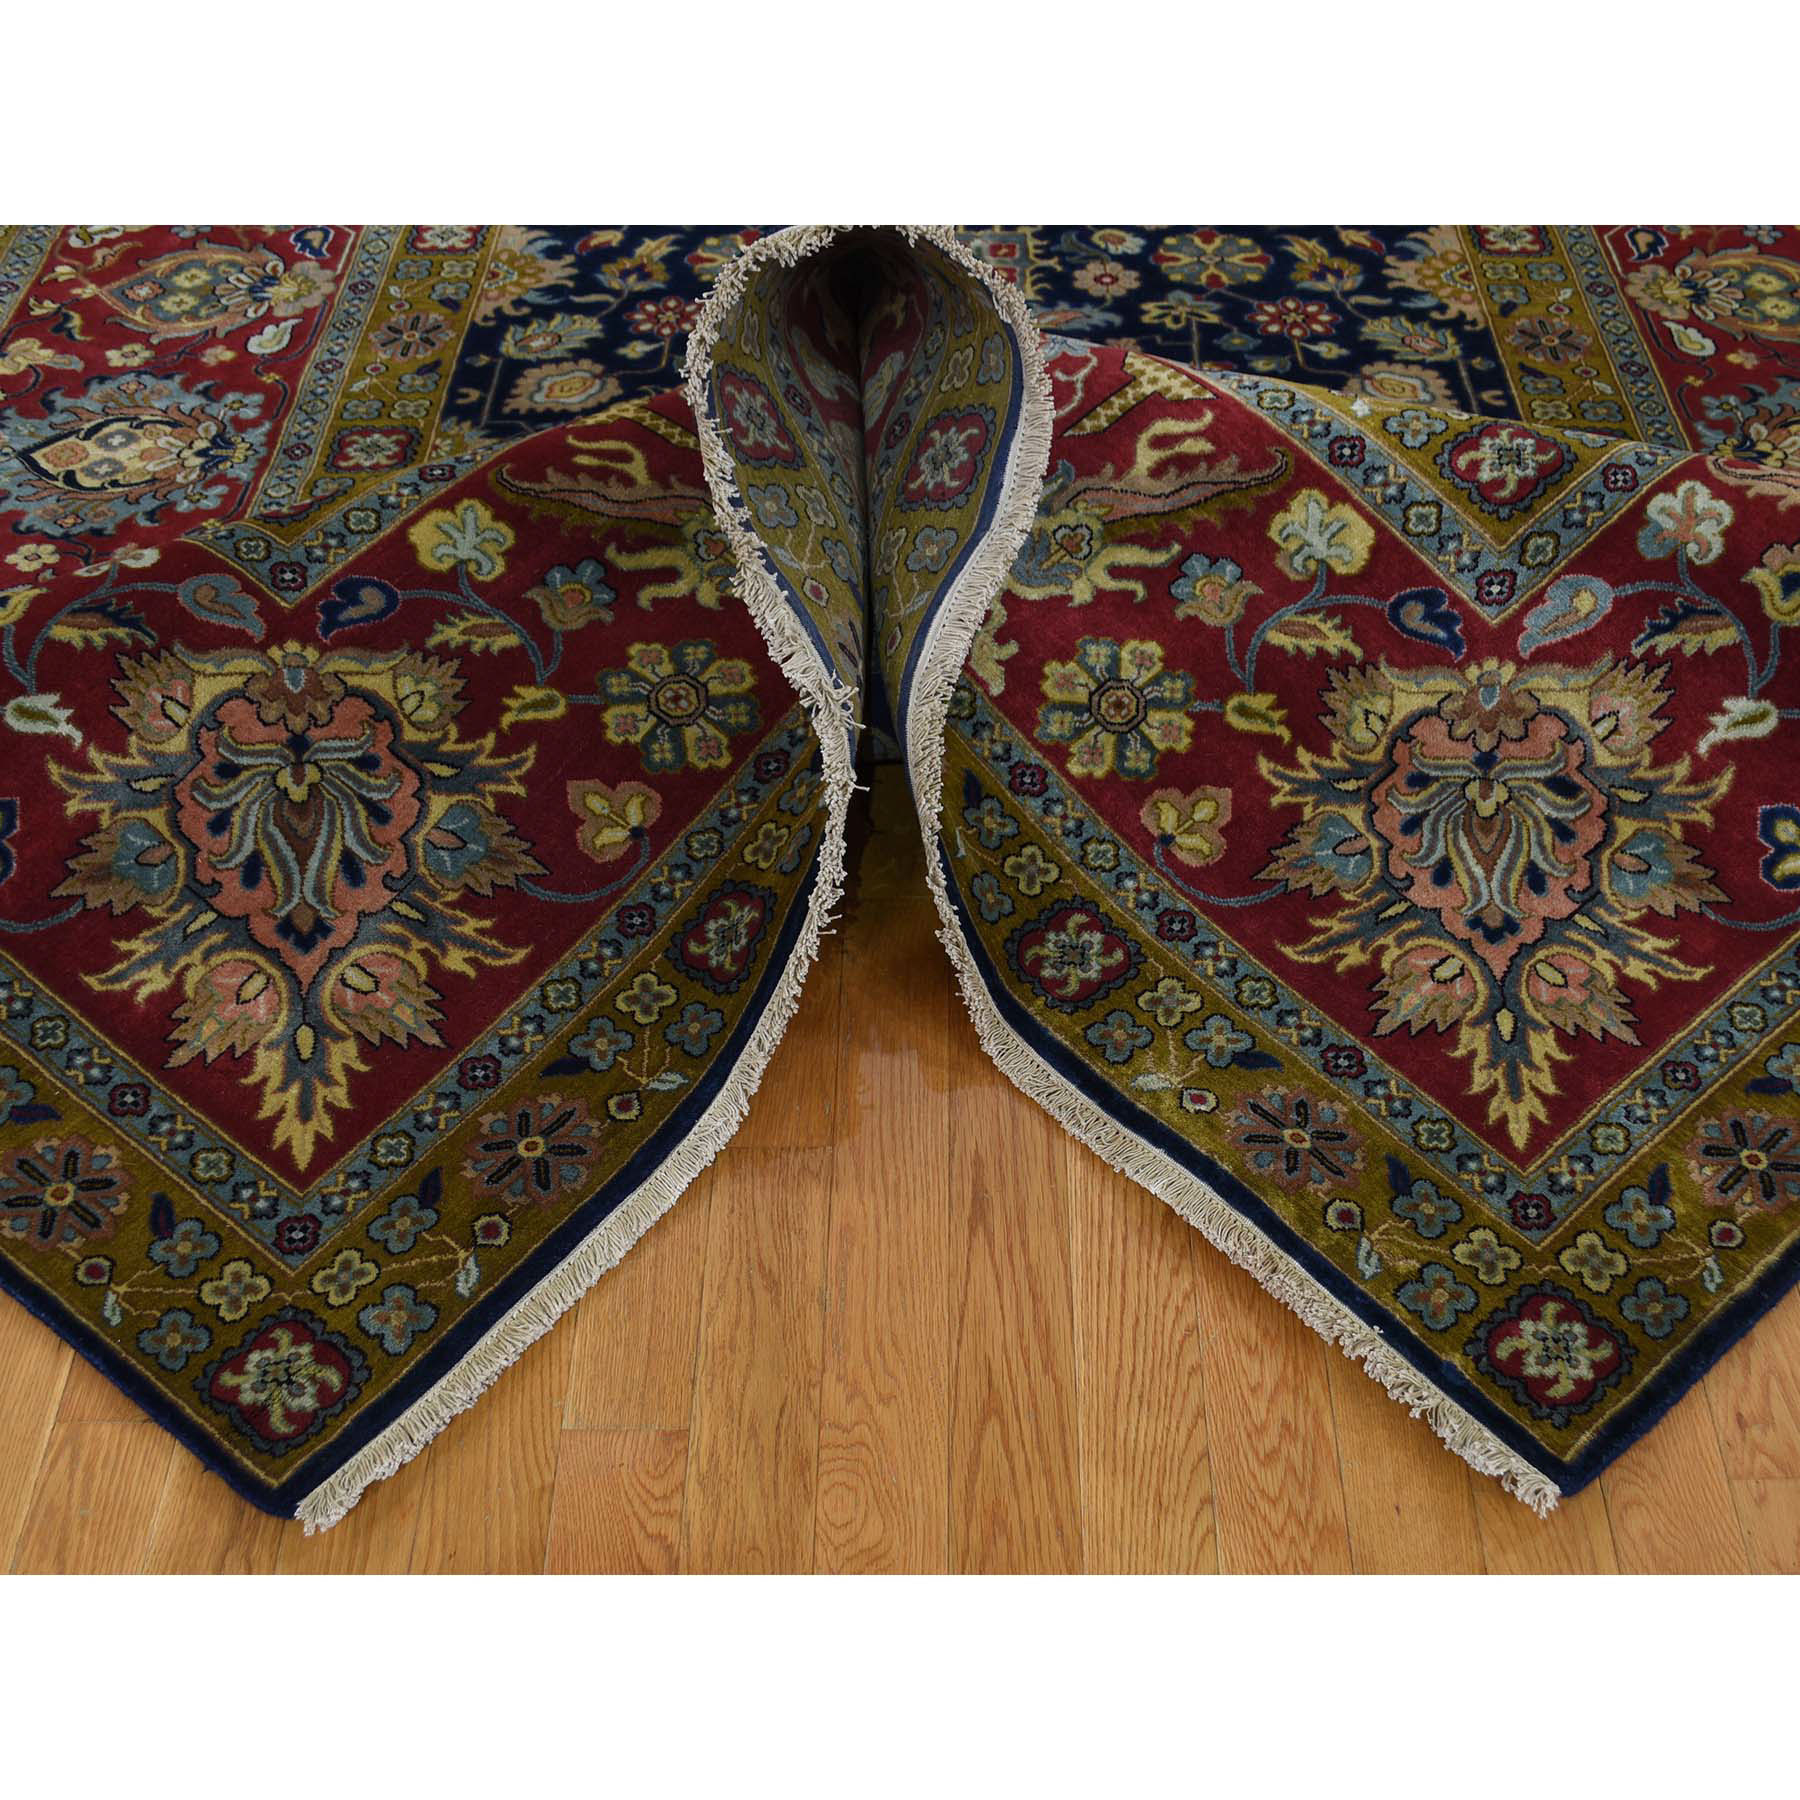 9-1--x12-2-- 300KPSI New Zealand Wool Hand-Knotted Oriental Rug 